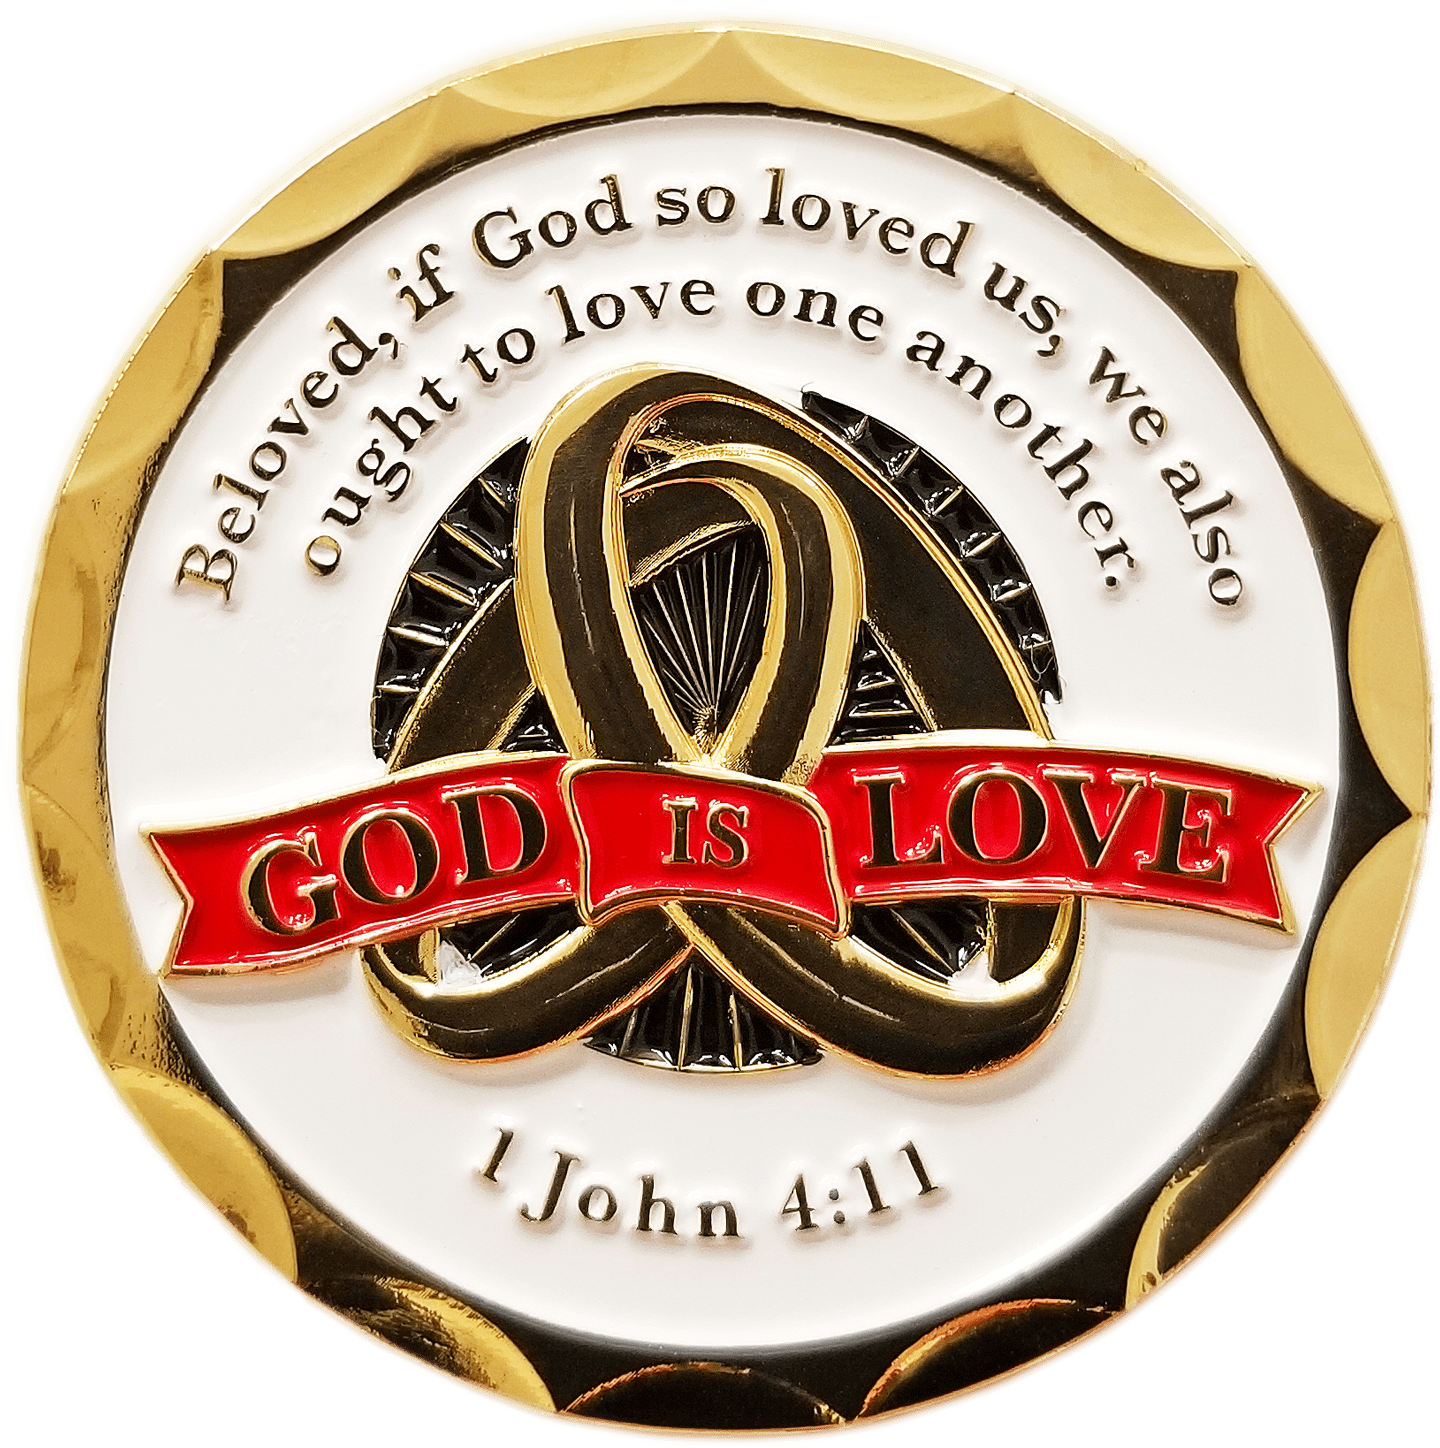 Front: Two rings, with text, "God is Love" / "Beloved, if God so loved us, we also ought to love one another." / "1 John 4:11